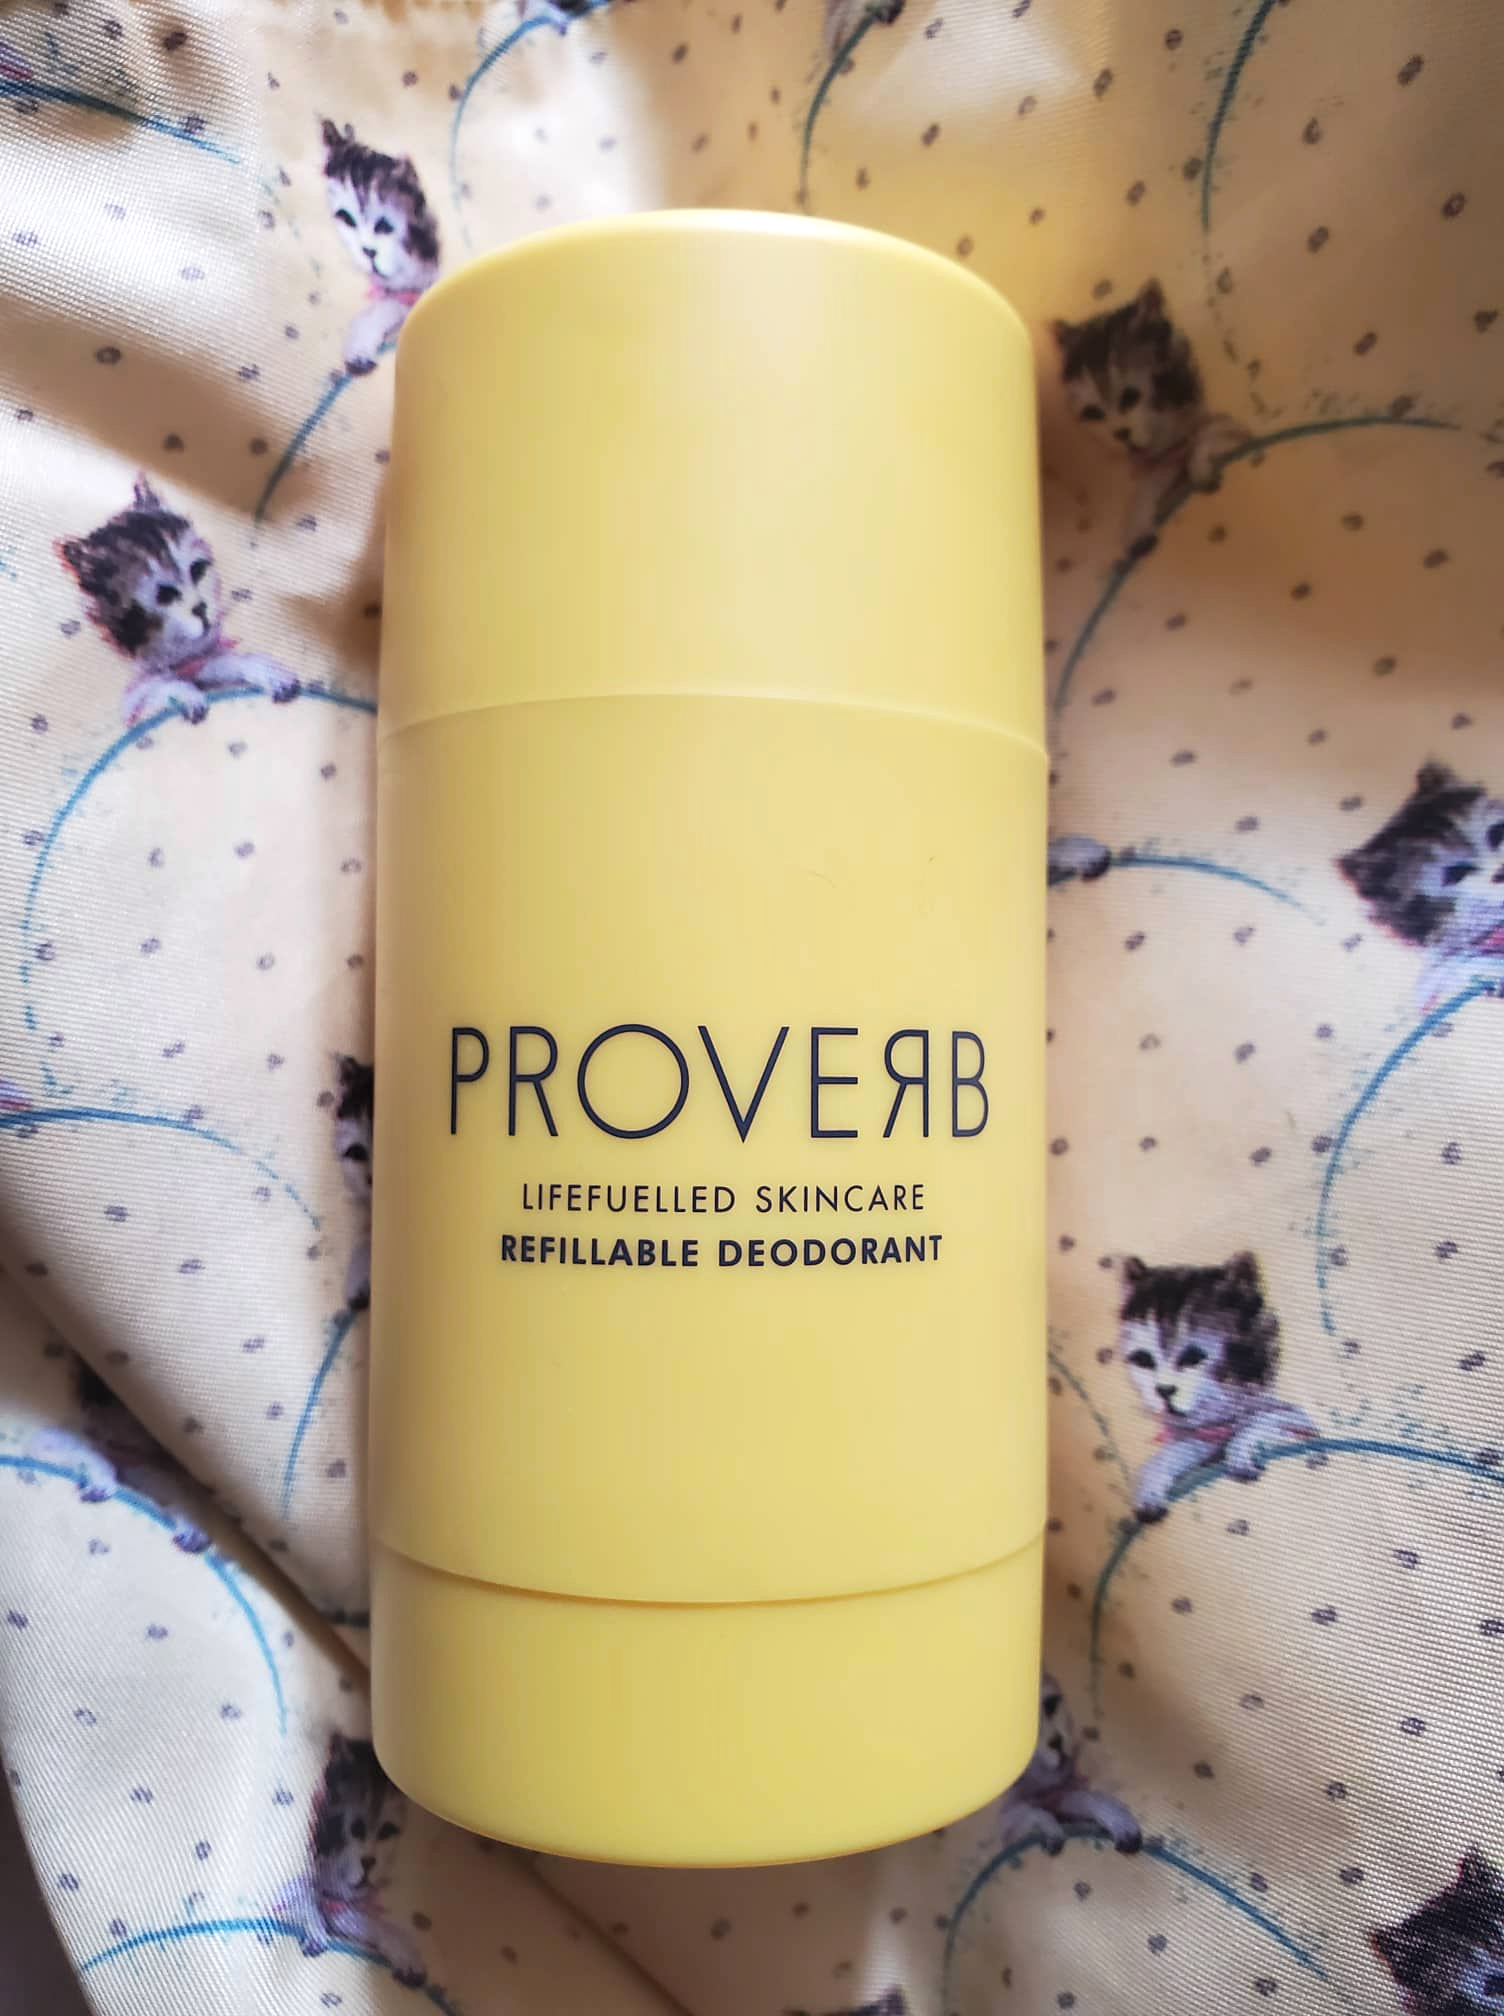 Proverb Skincare Refillable Natural Deodorant in yellow case